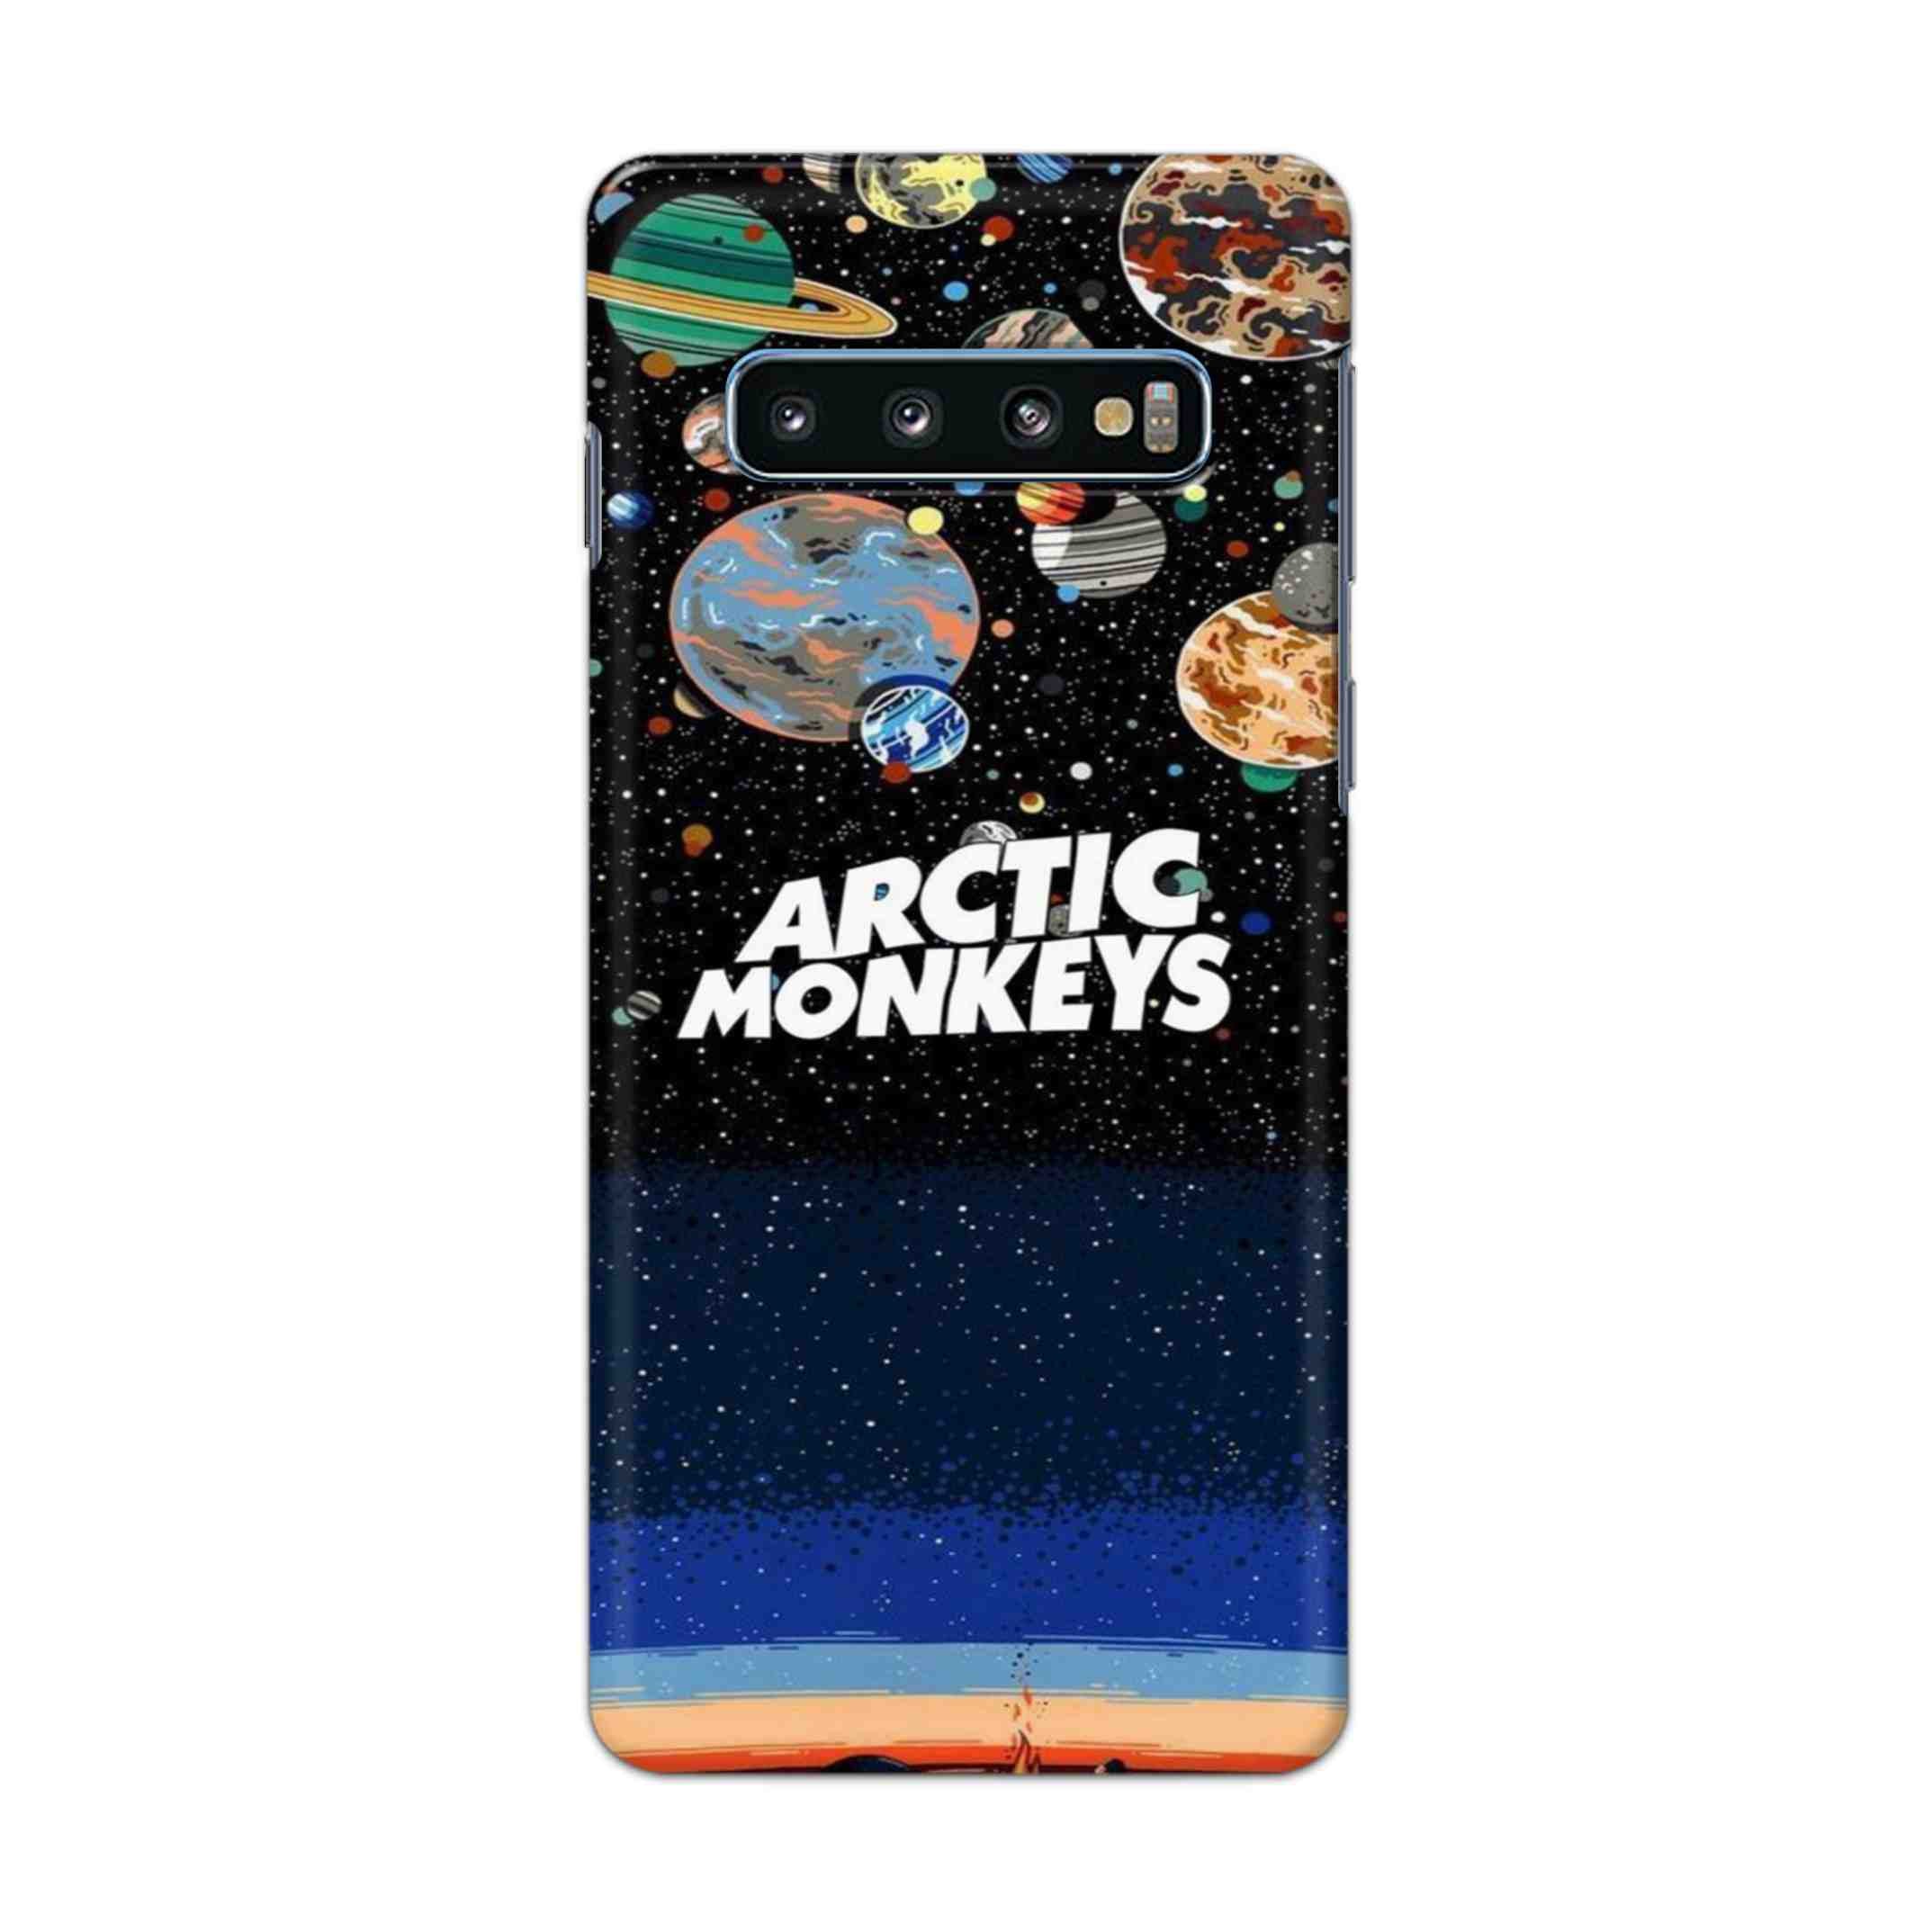 Buy Artic Monkeys Hard Back Mobile Phone Case Cover For Samsung Galaxy S10 Plus Online